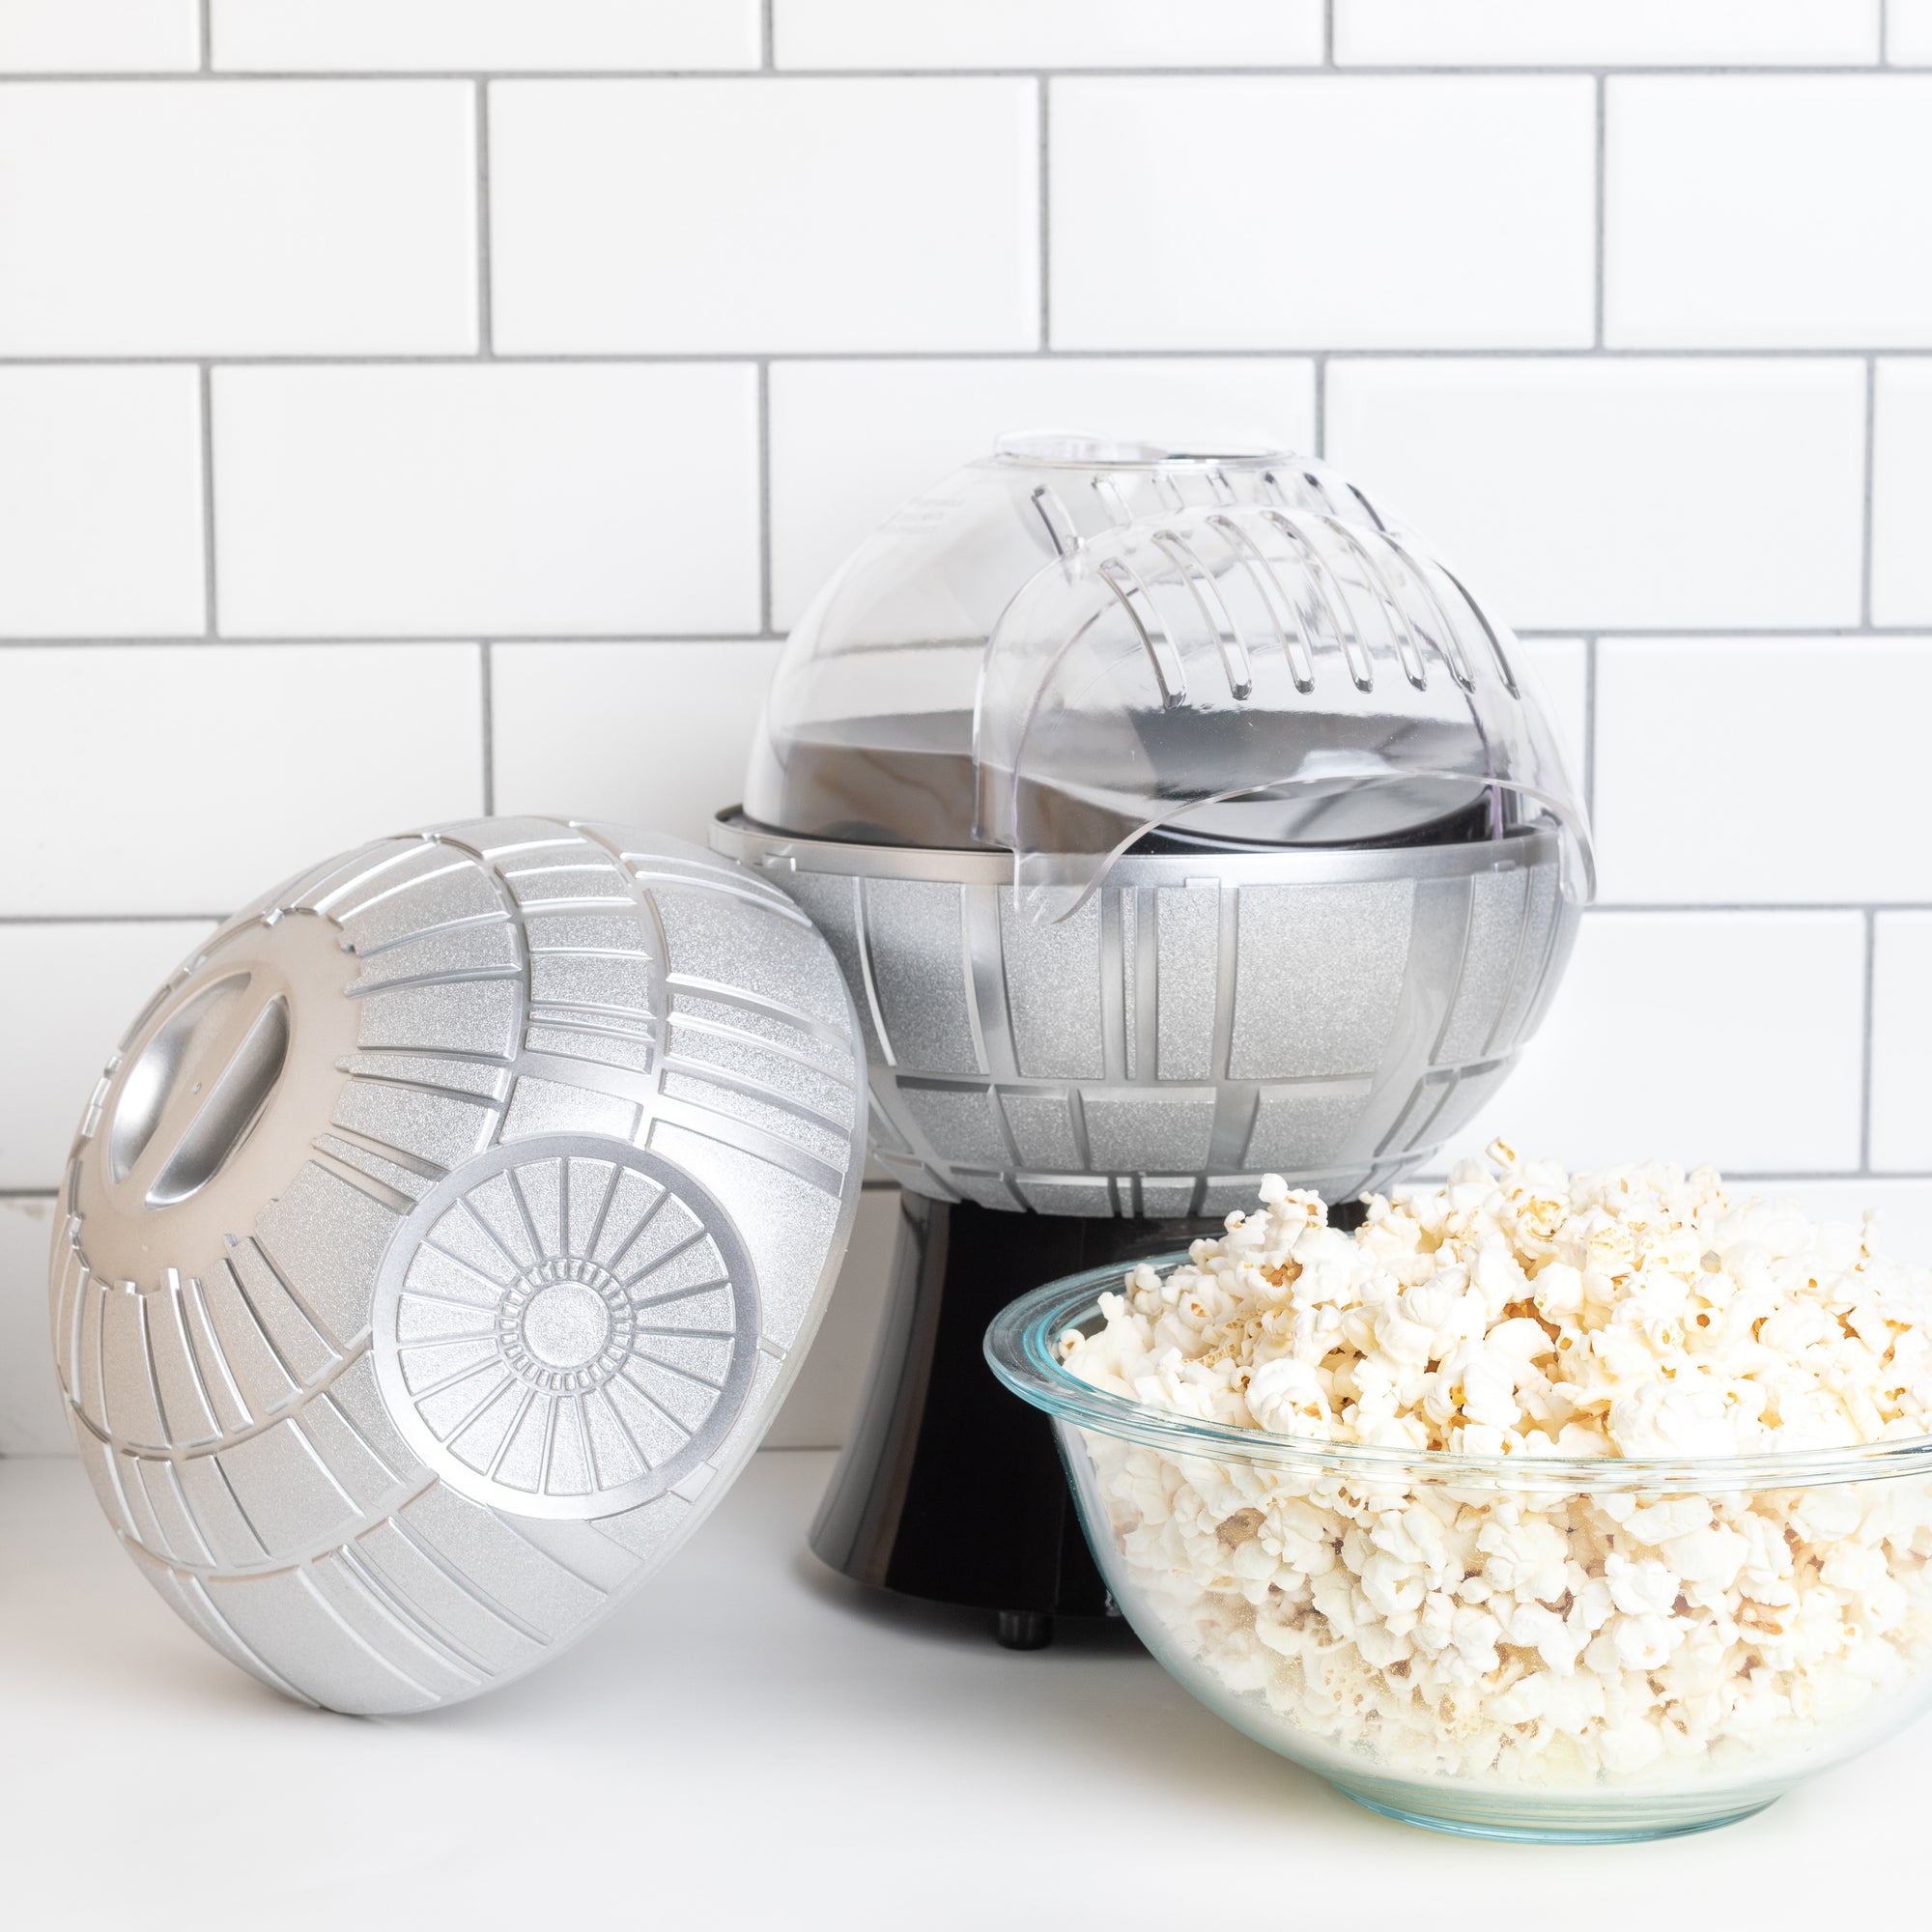 Uncanny Brands Best Practice on Optimal Popcorn Popping with R2D2